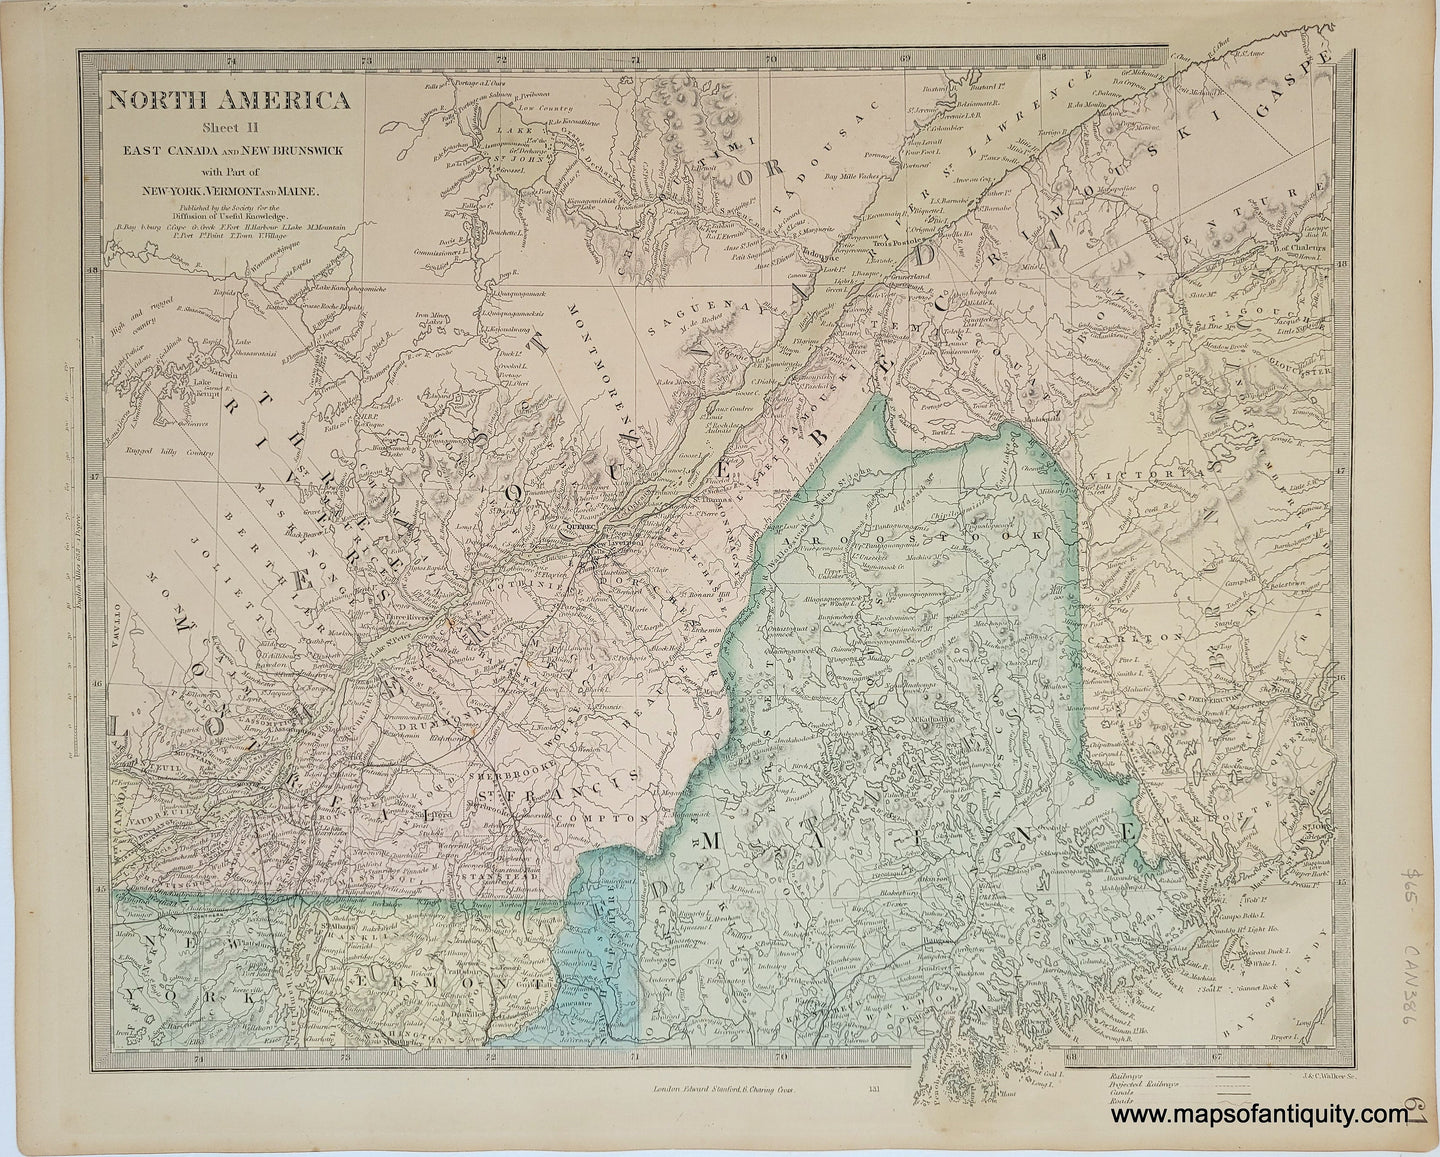 Genuine-Antique-Map-North-America-Sheet-II-East-Canada-and-New-Brunswick-with-Part-of-New-York-Vermont-and-Maine-Canada-East--1860-SDUK-Society-for-the-Diffusion-of-Useful-Knowledge-Maps-Of-Antiquity-1800s-19th-century